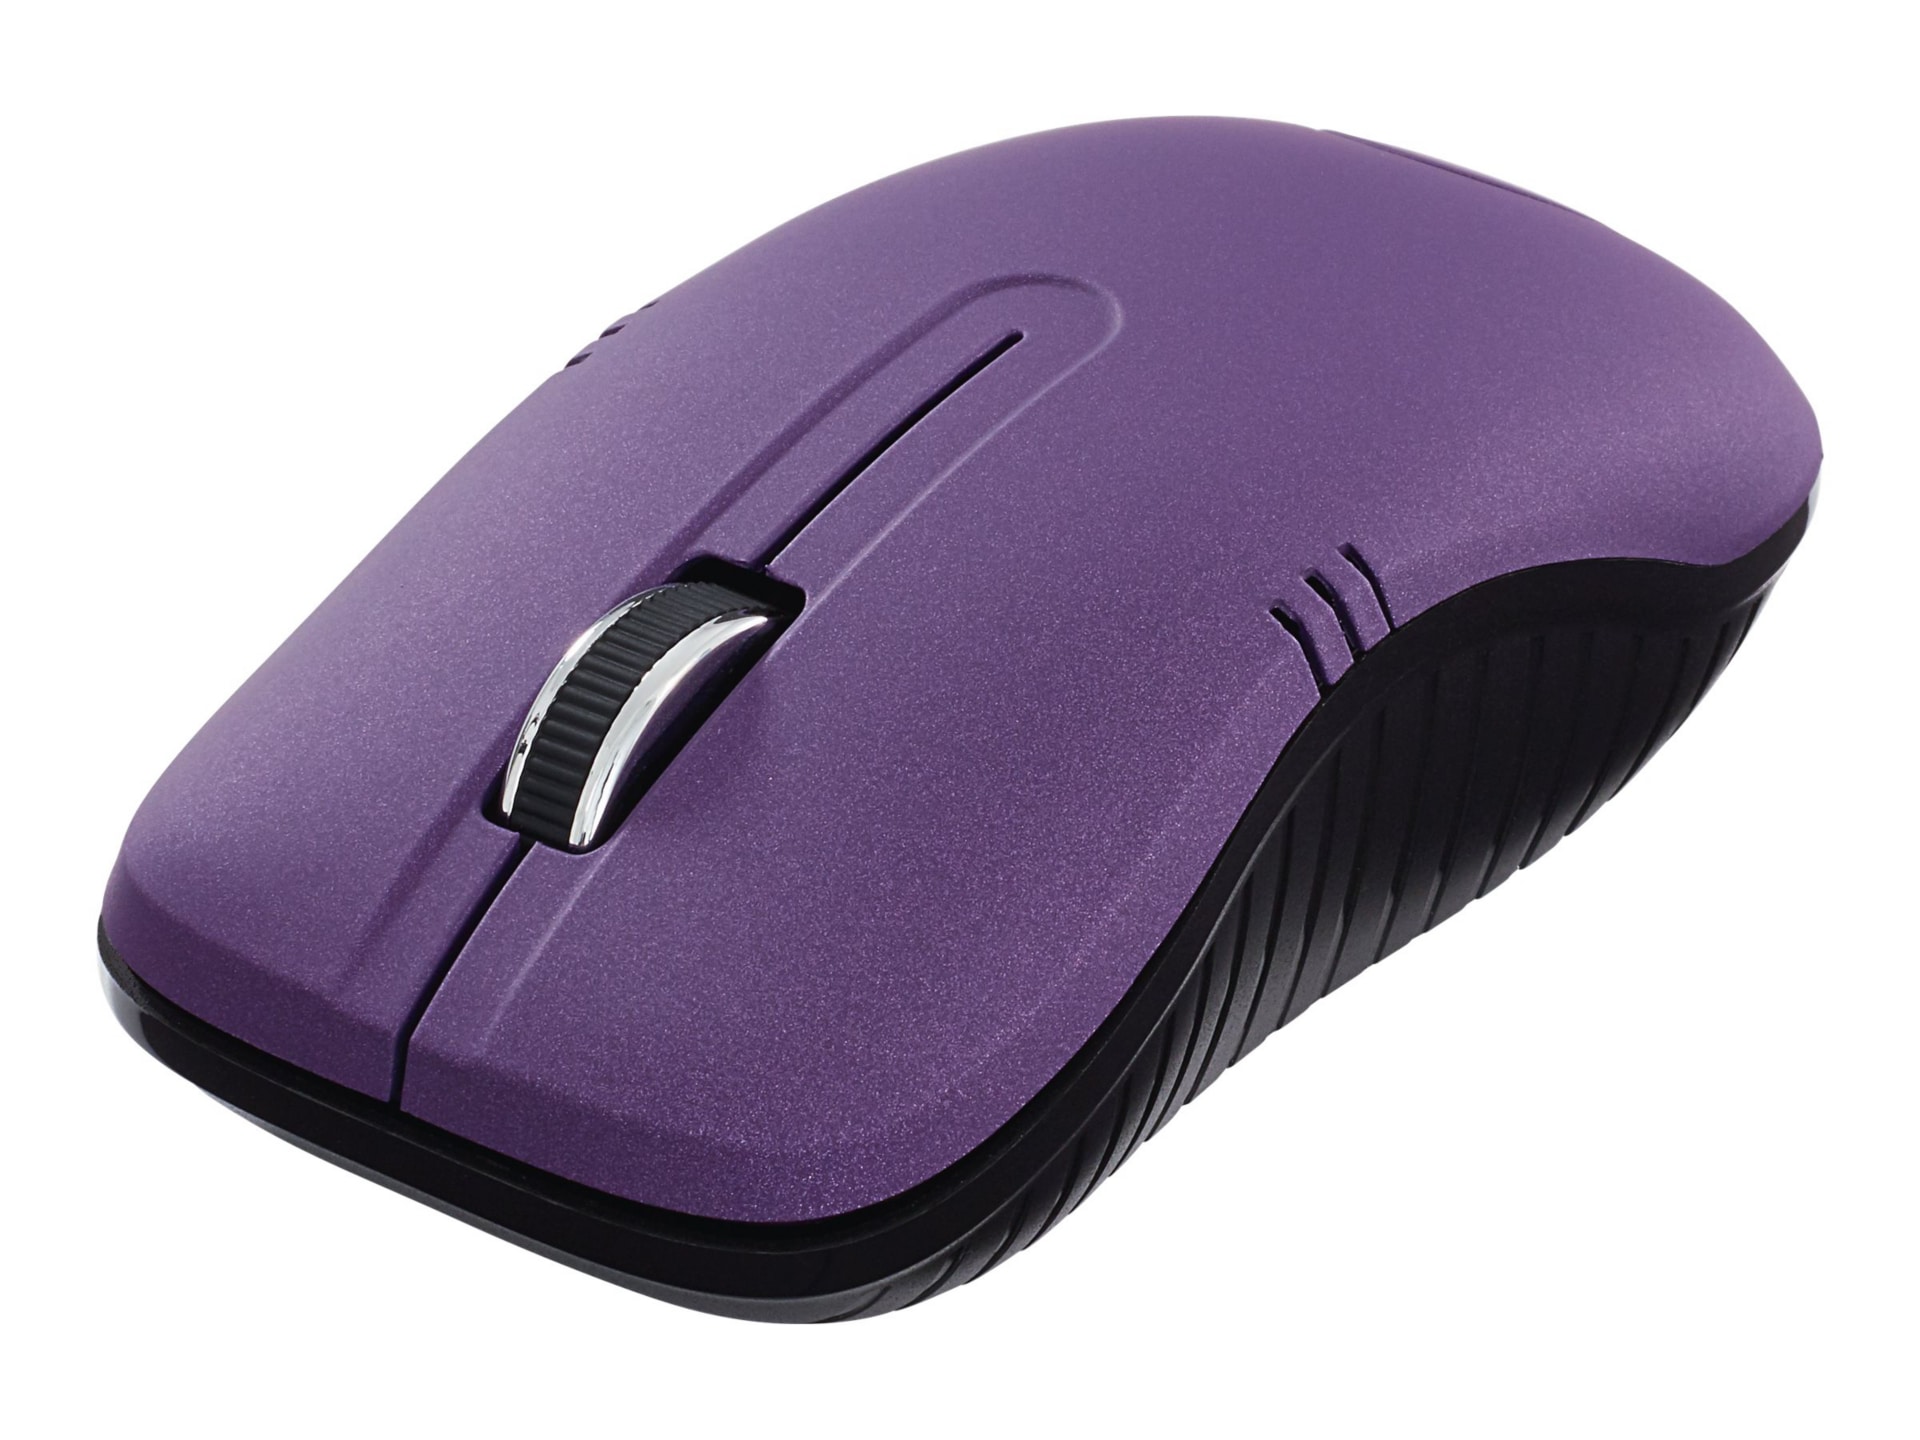 Verbatim Wireless Optical Notebook Mouse Commuter Series - mouse - 2.4 GHz